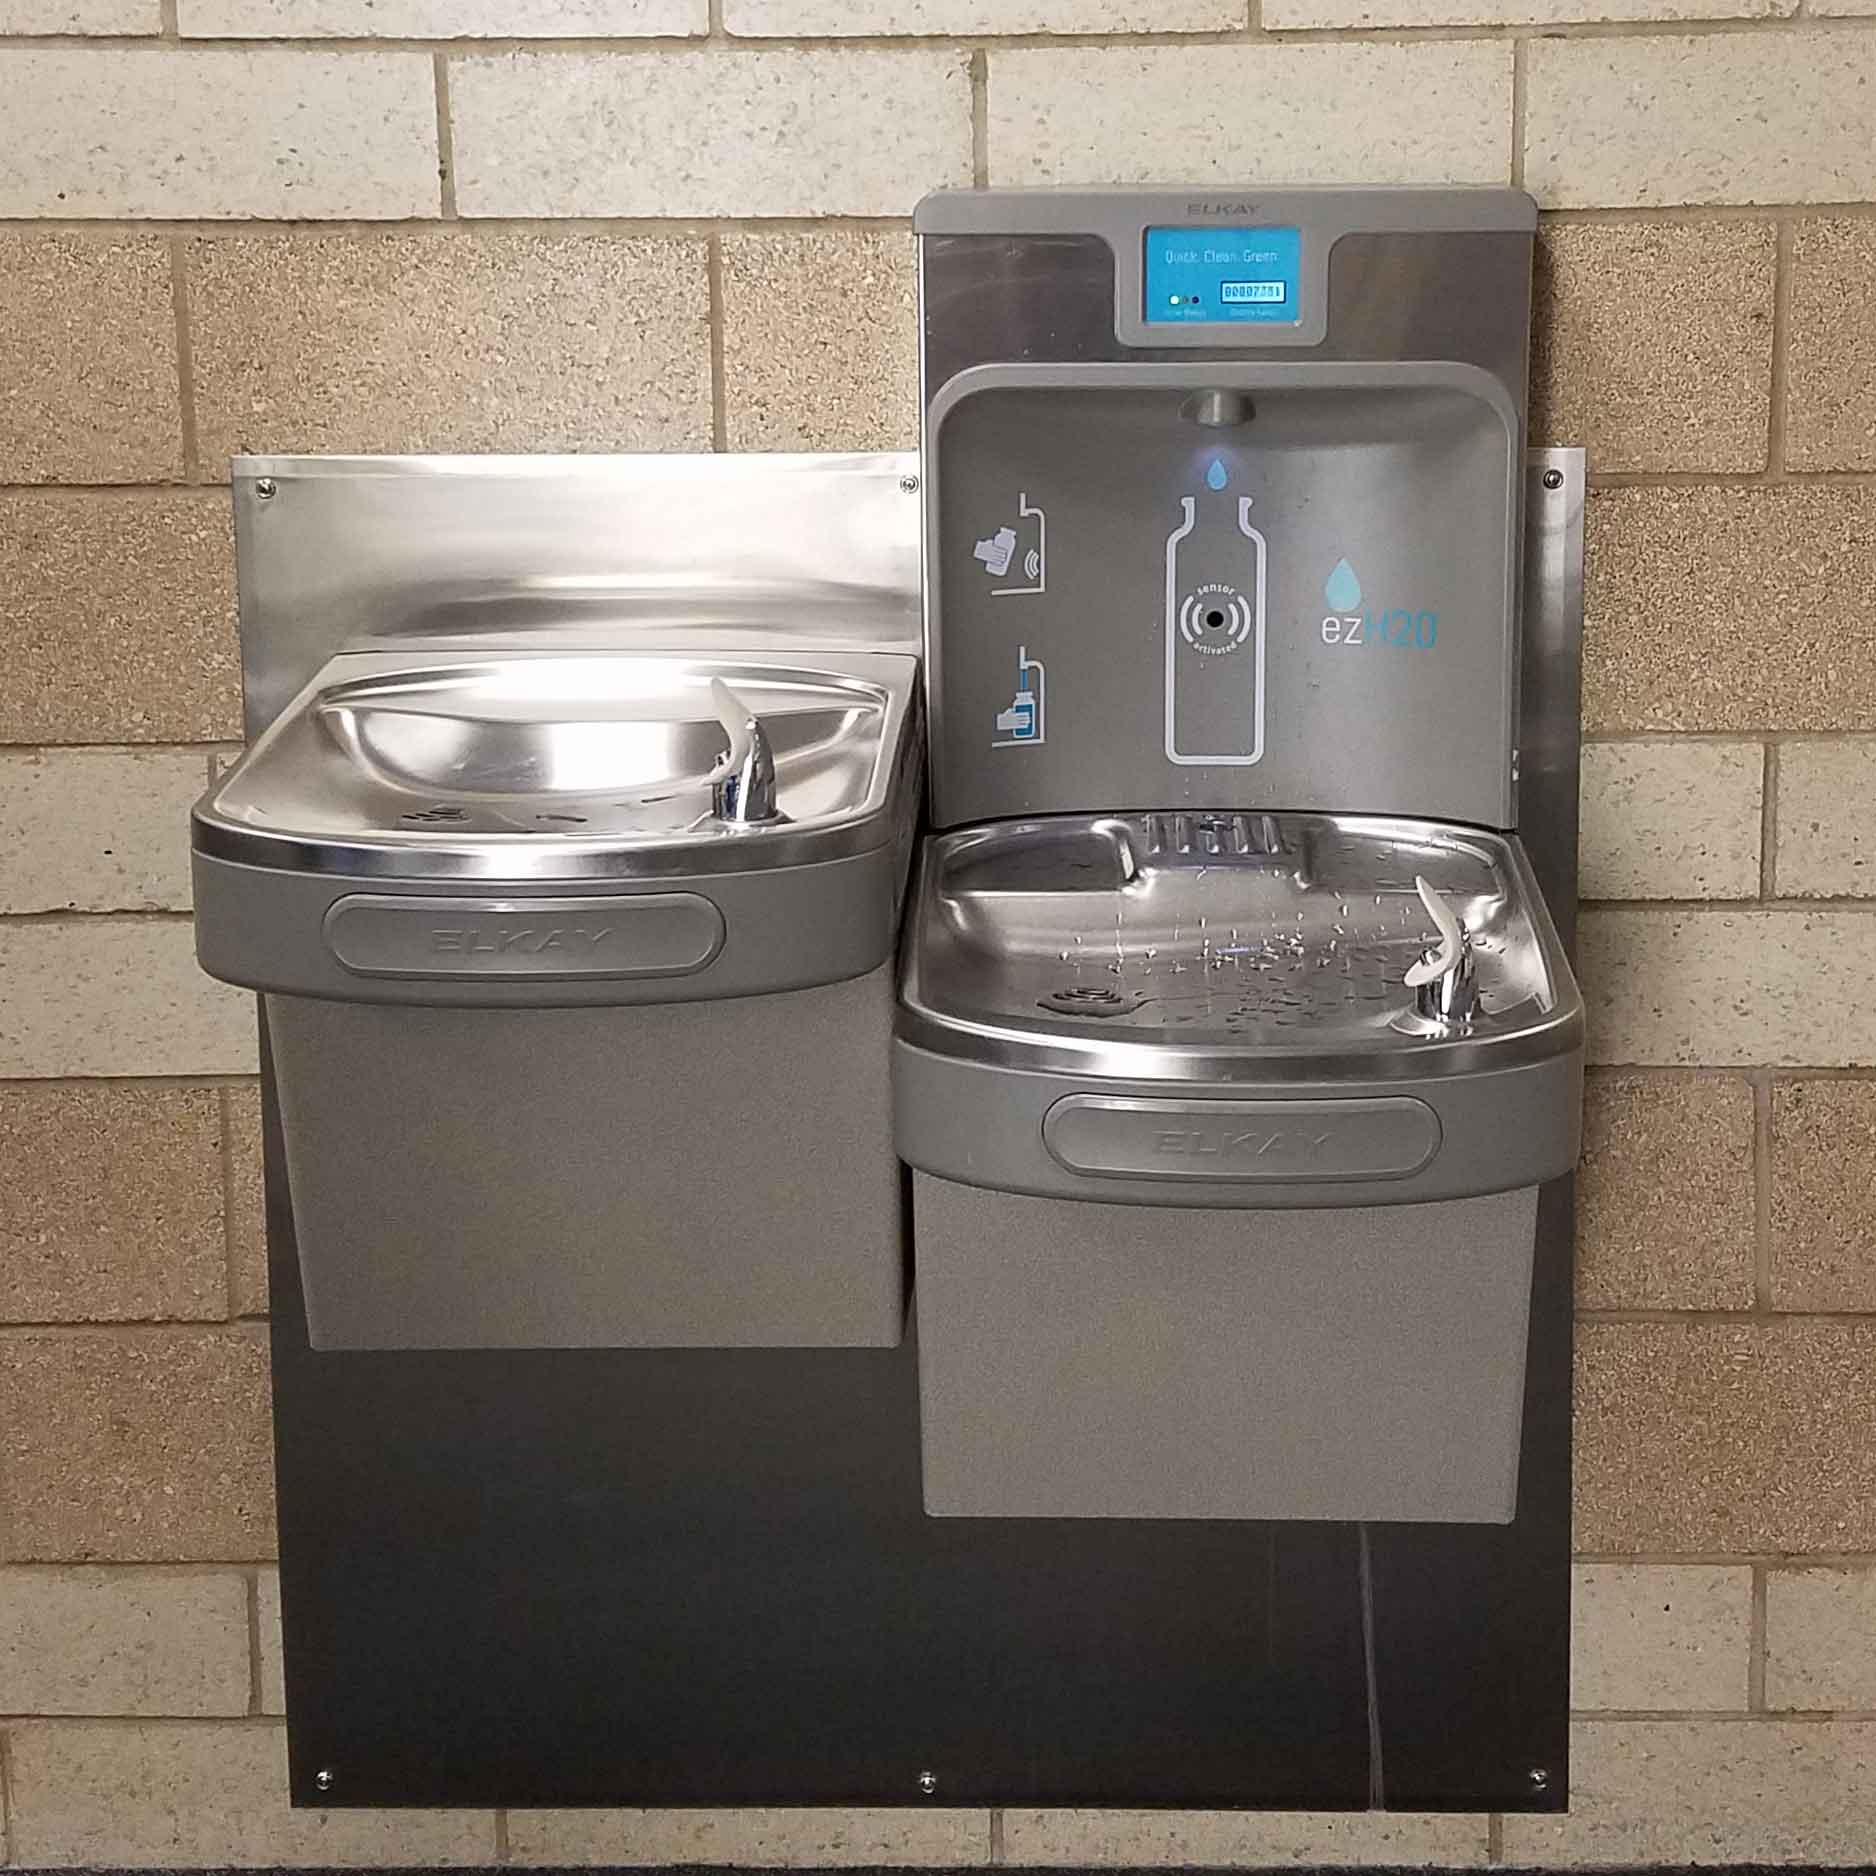 Installed water fountain and water bottle filling station